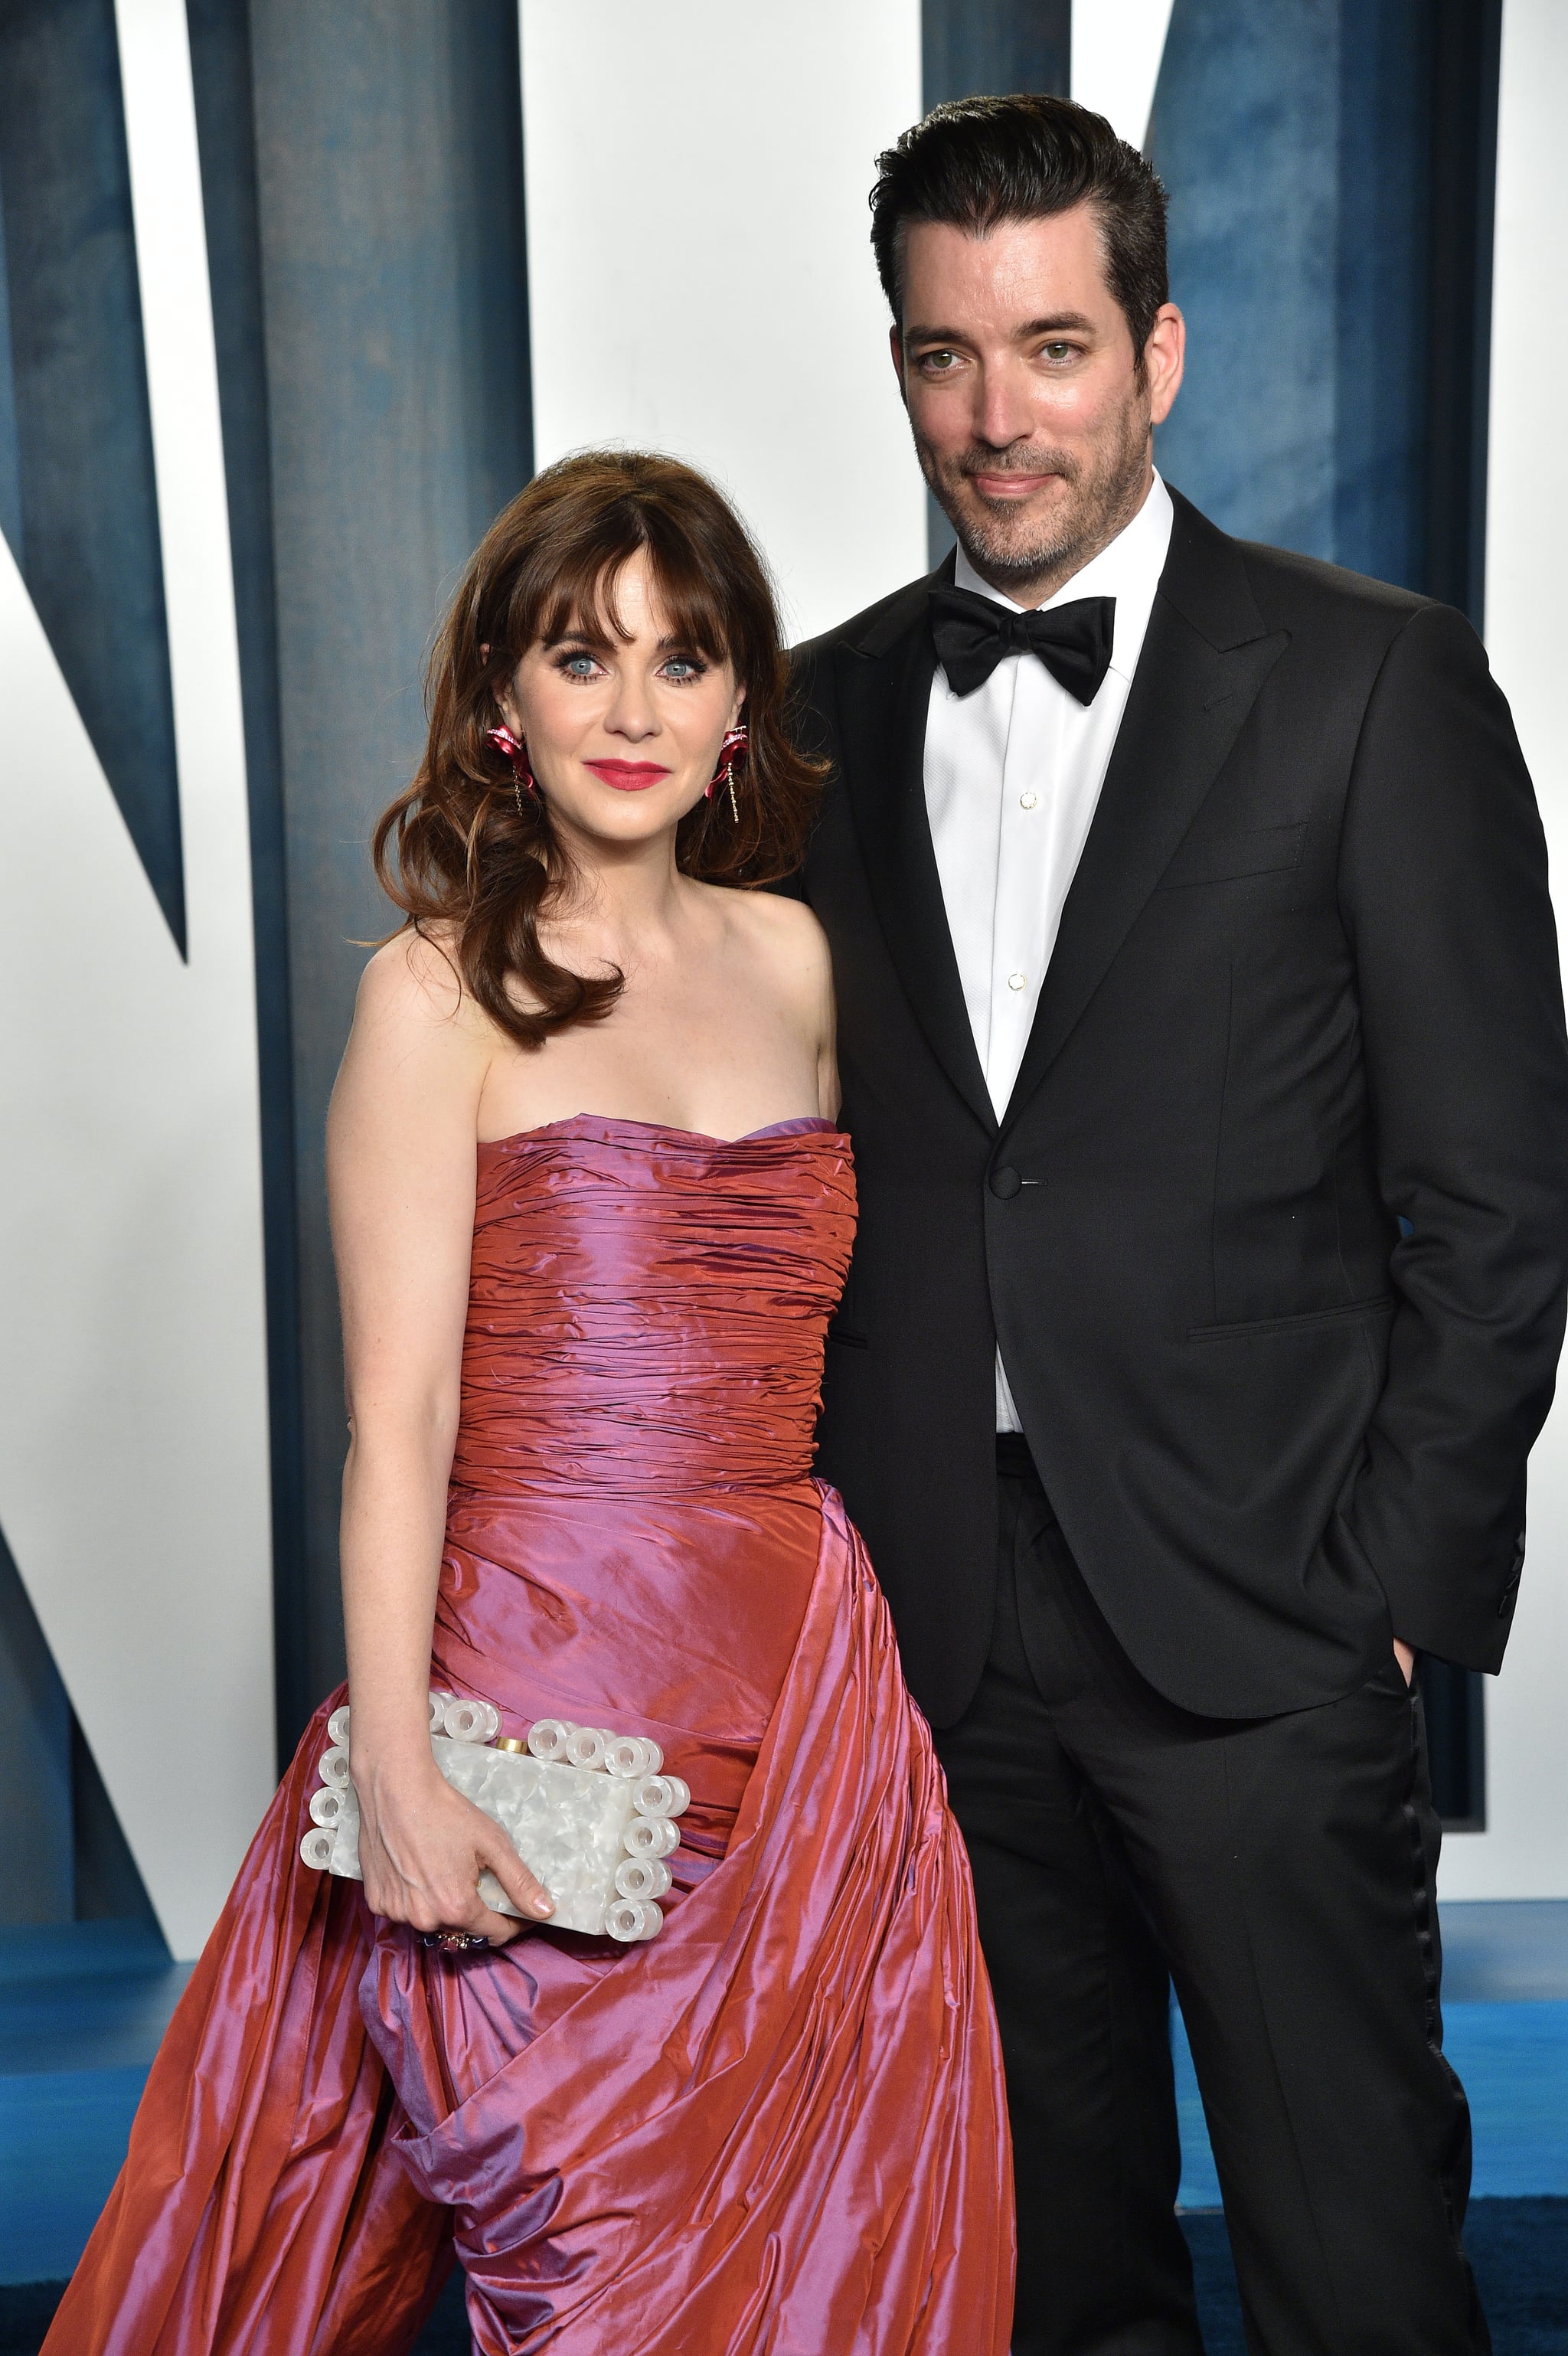 BEVERLY HILLS, CALIFORNIA - MARCH 27: Zooey Deschanel and Jonathan Scott attend the 2022 Vanity Fair Oscar Party hosted by Radhika Jones at Wallis Annenberg Centre for the Performing Arts on March 27, 2022 in Beverly Hills, California. (Photo by Lionel Hahn/Getty Images)